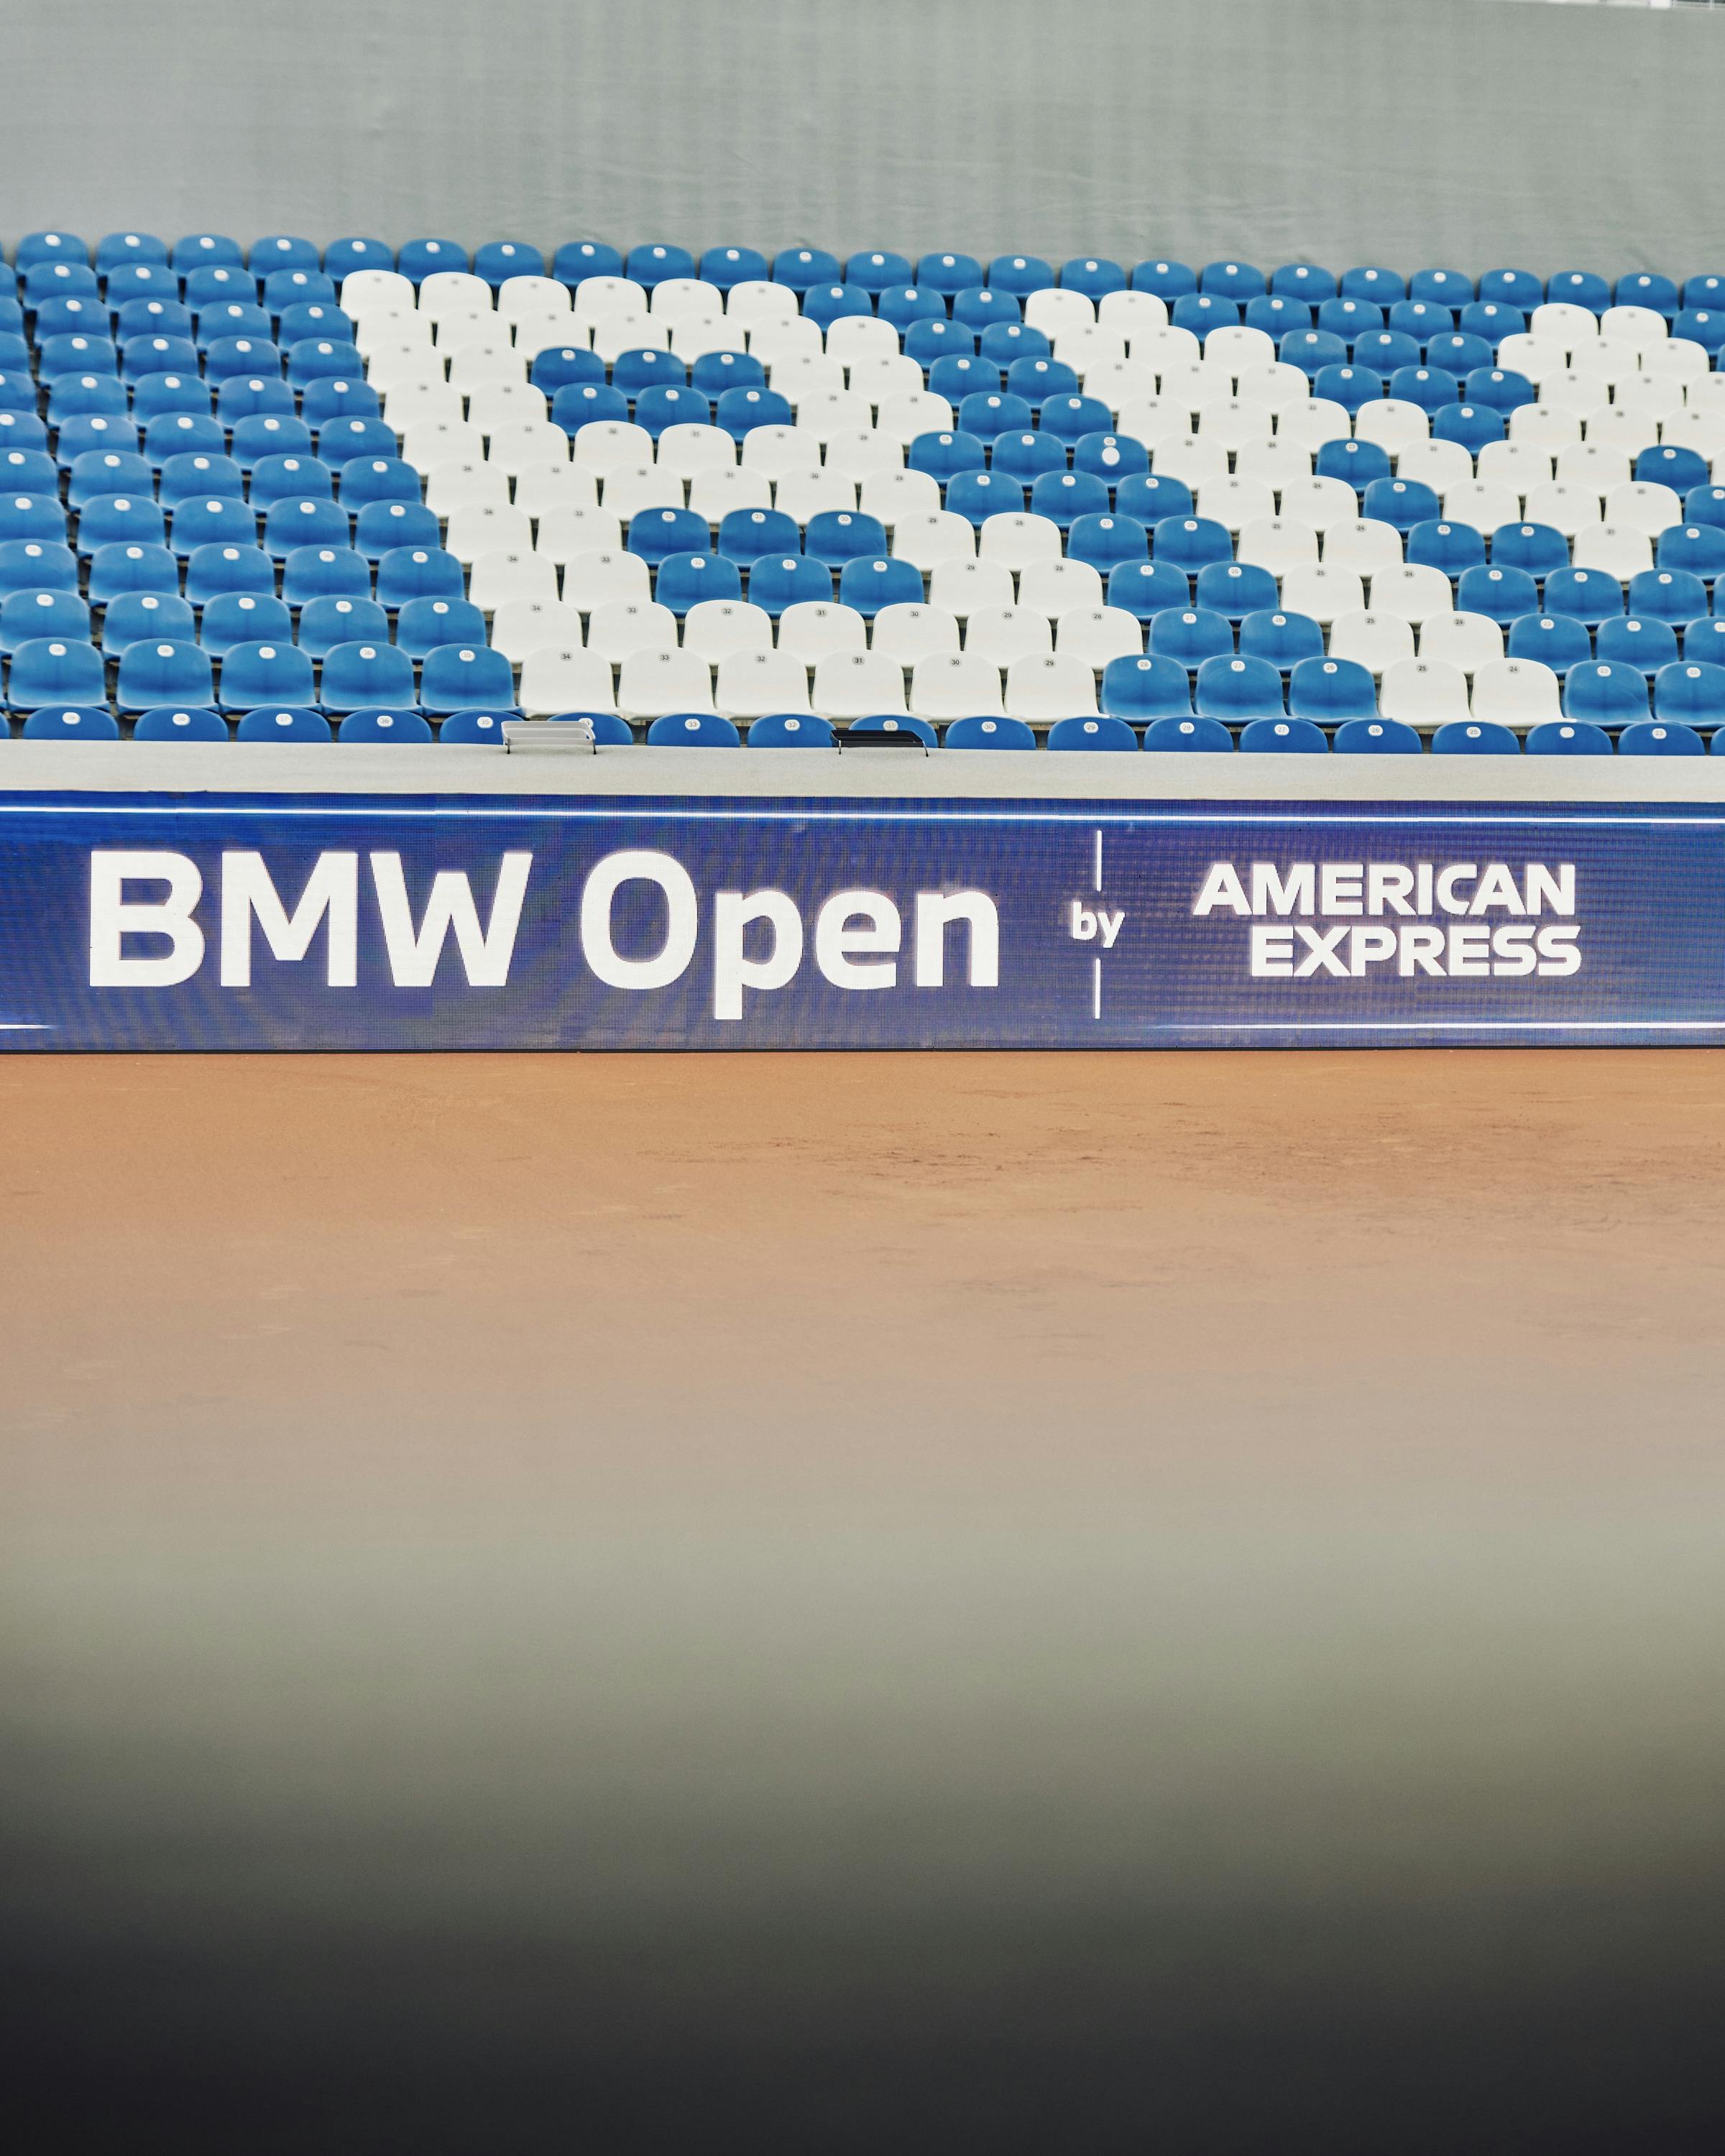 BMW Open by American Express